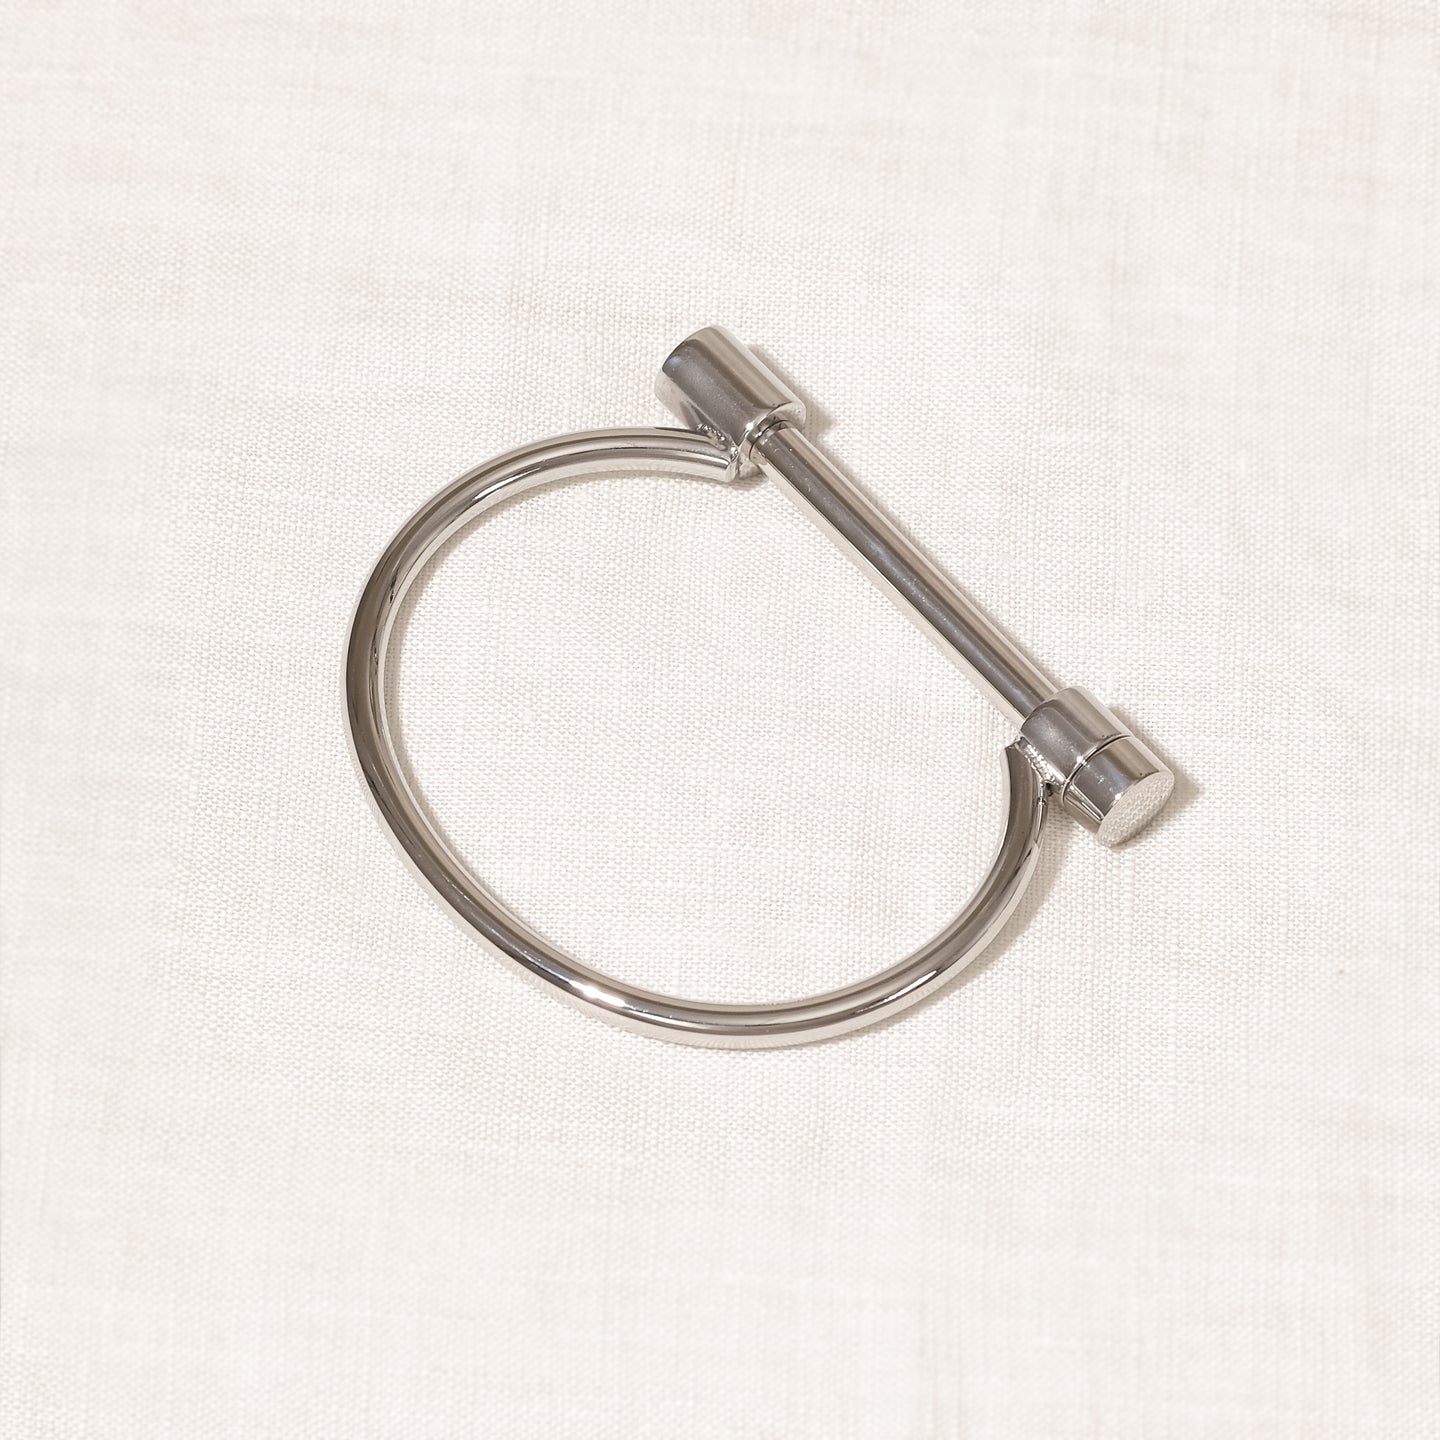 files/fal-tiny-bangle-stainless-steel-1.jpg